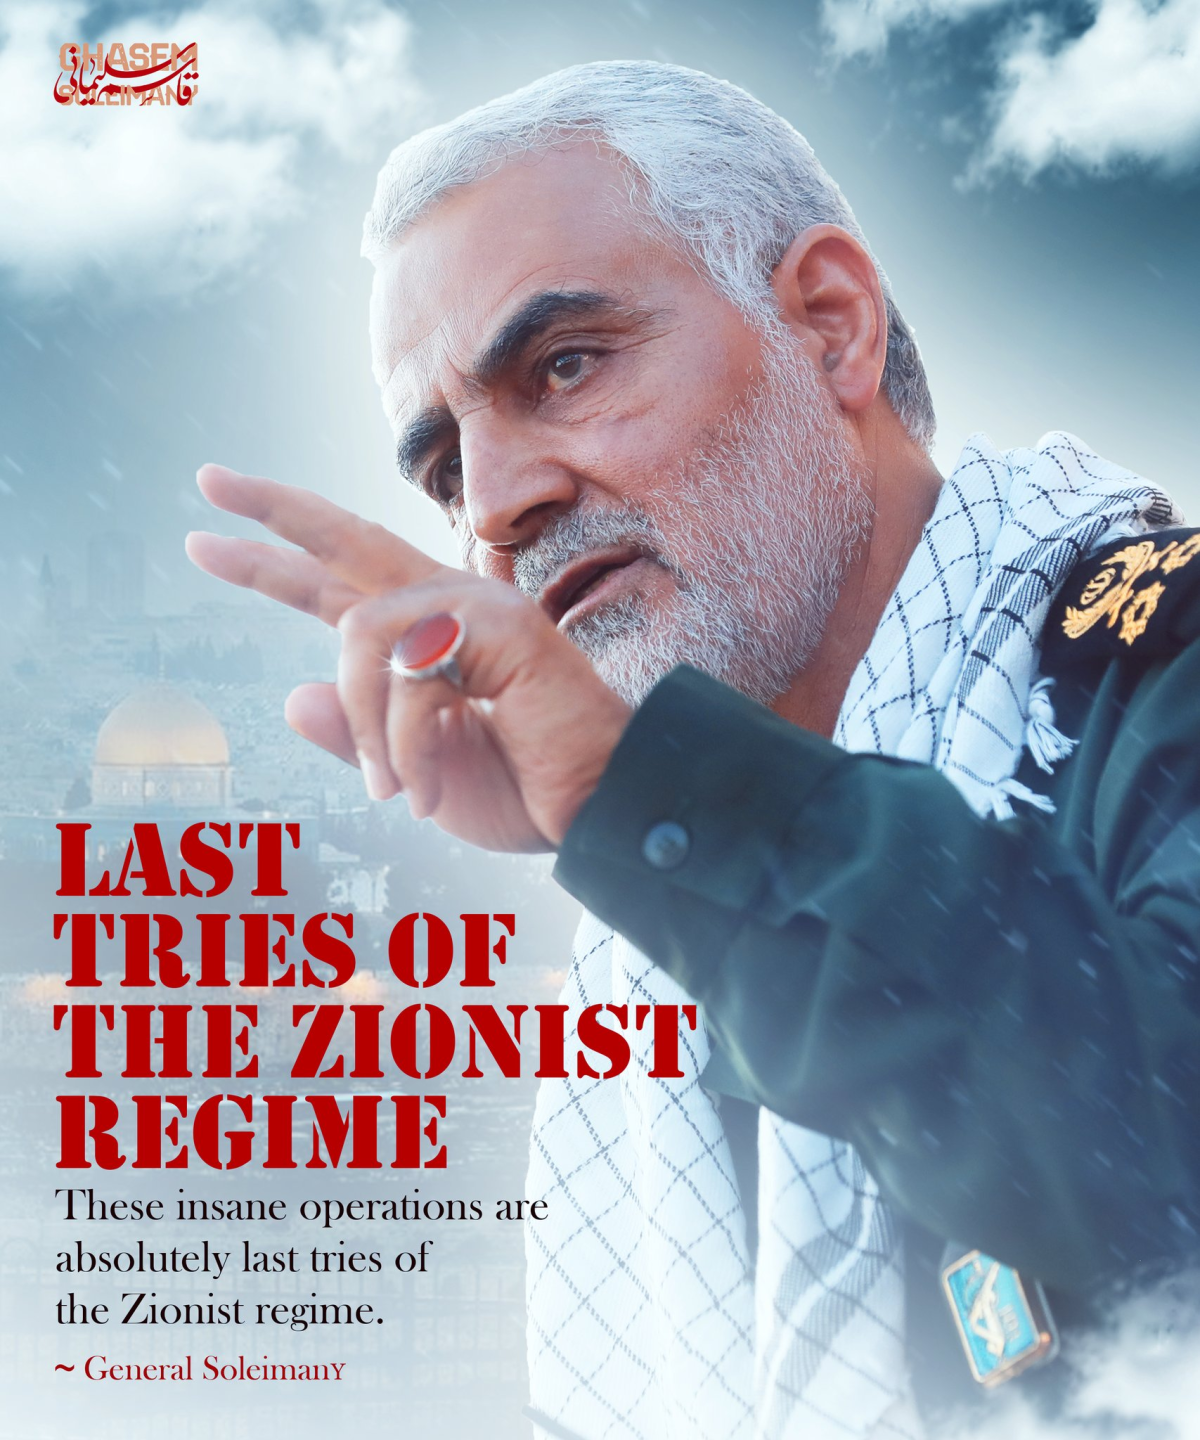  Last tries of the zionist regime